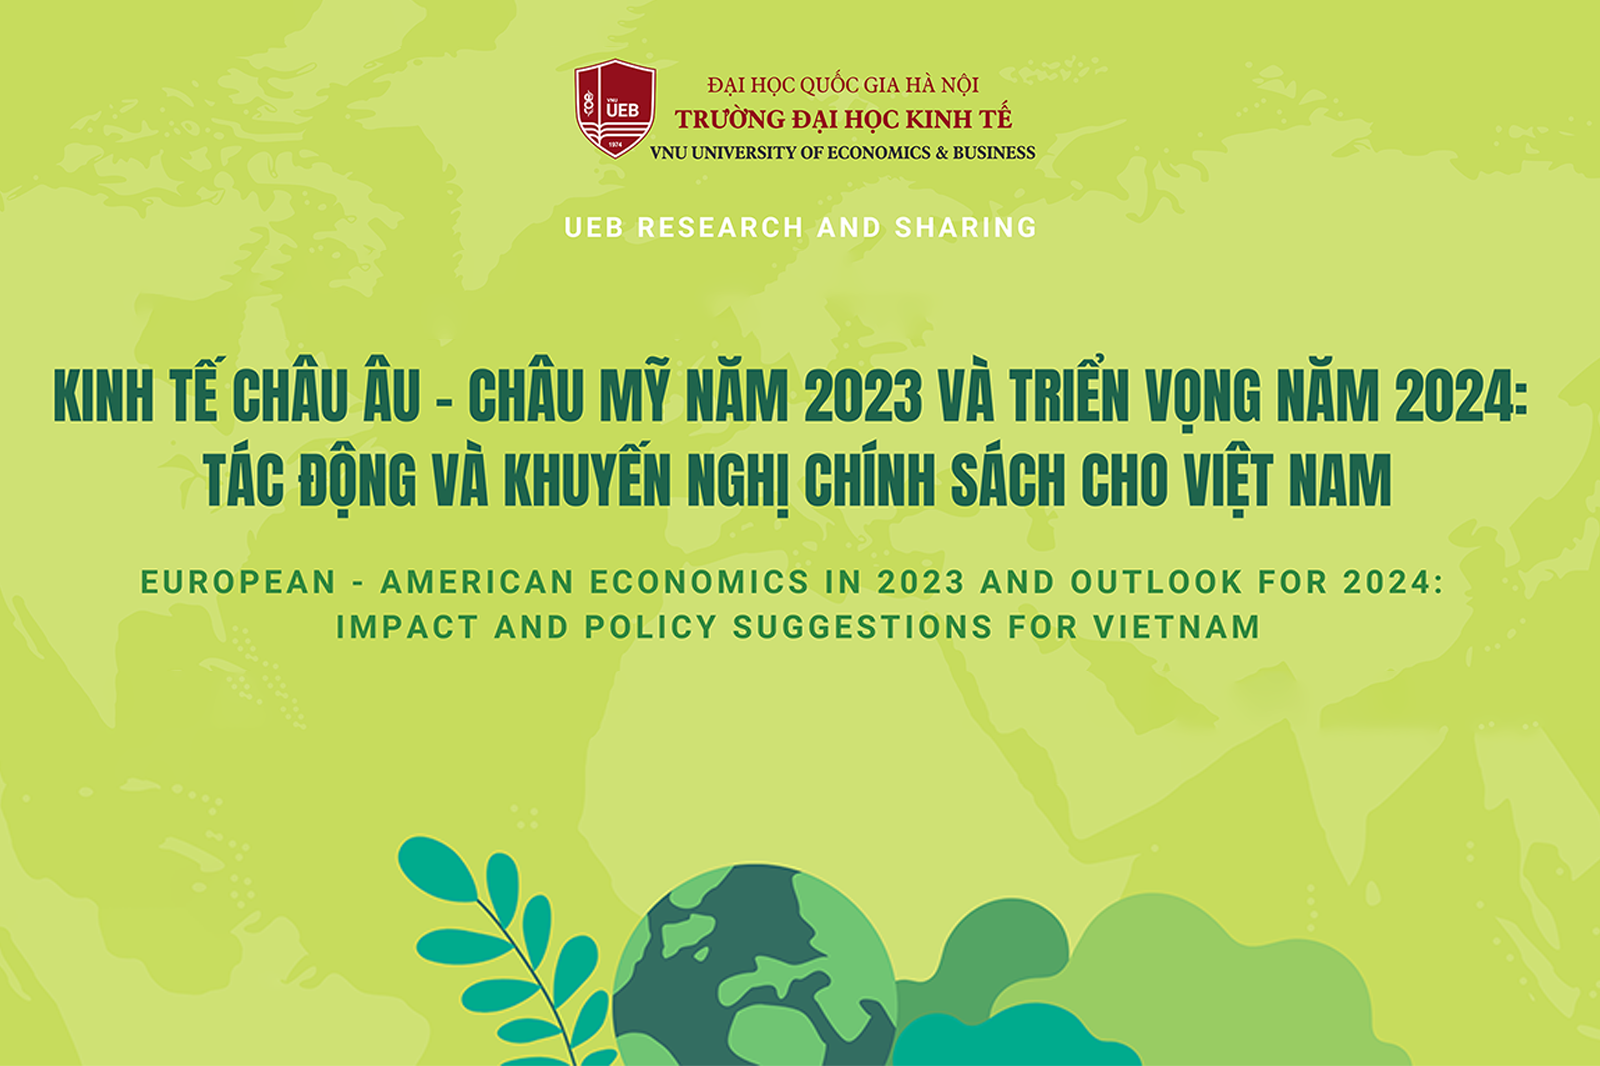 UEB holds Academic Seminar on “European - American Economics in 2023 and Outlook for 2024: Impact and Policy Suggestions for Vietnam”